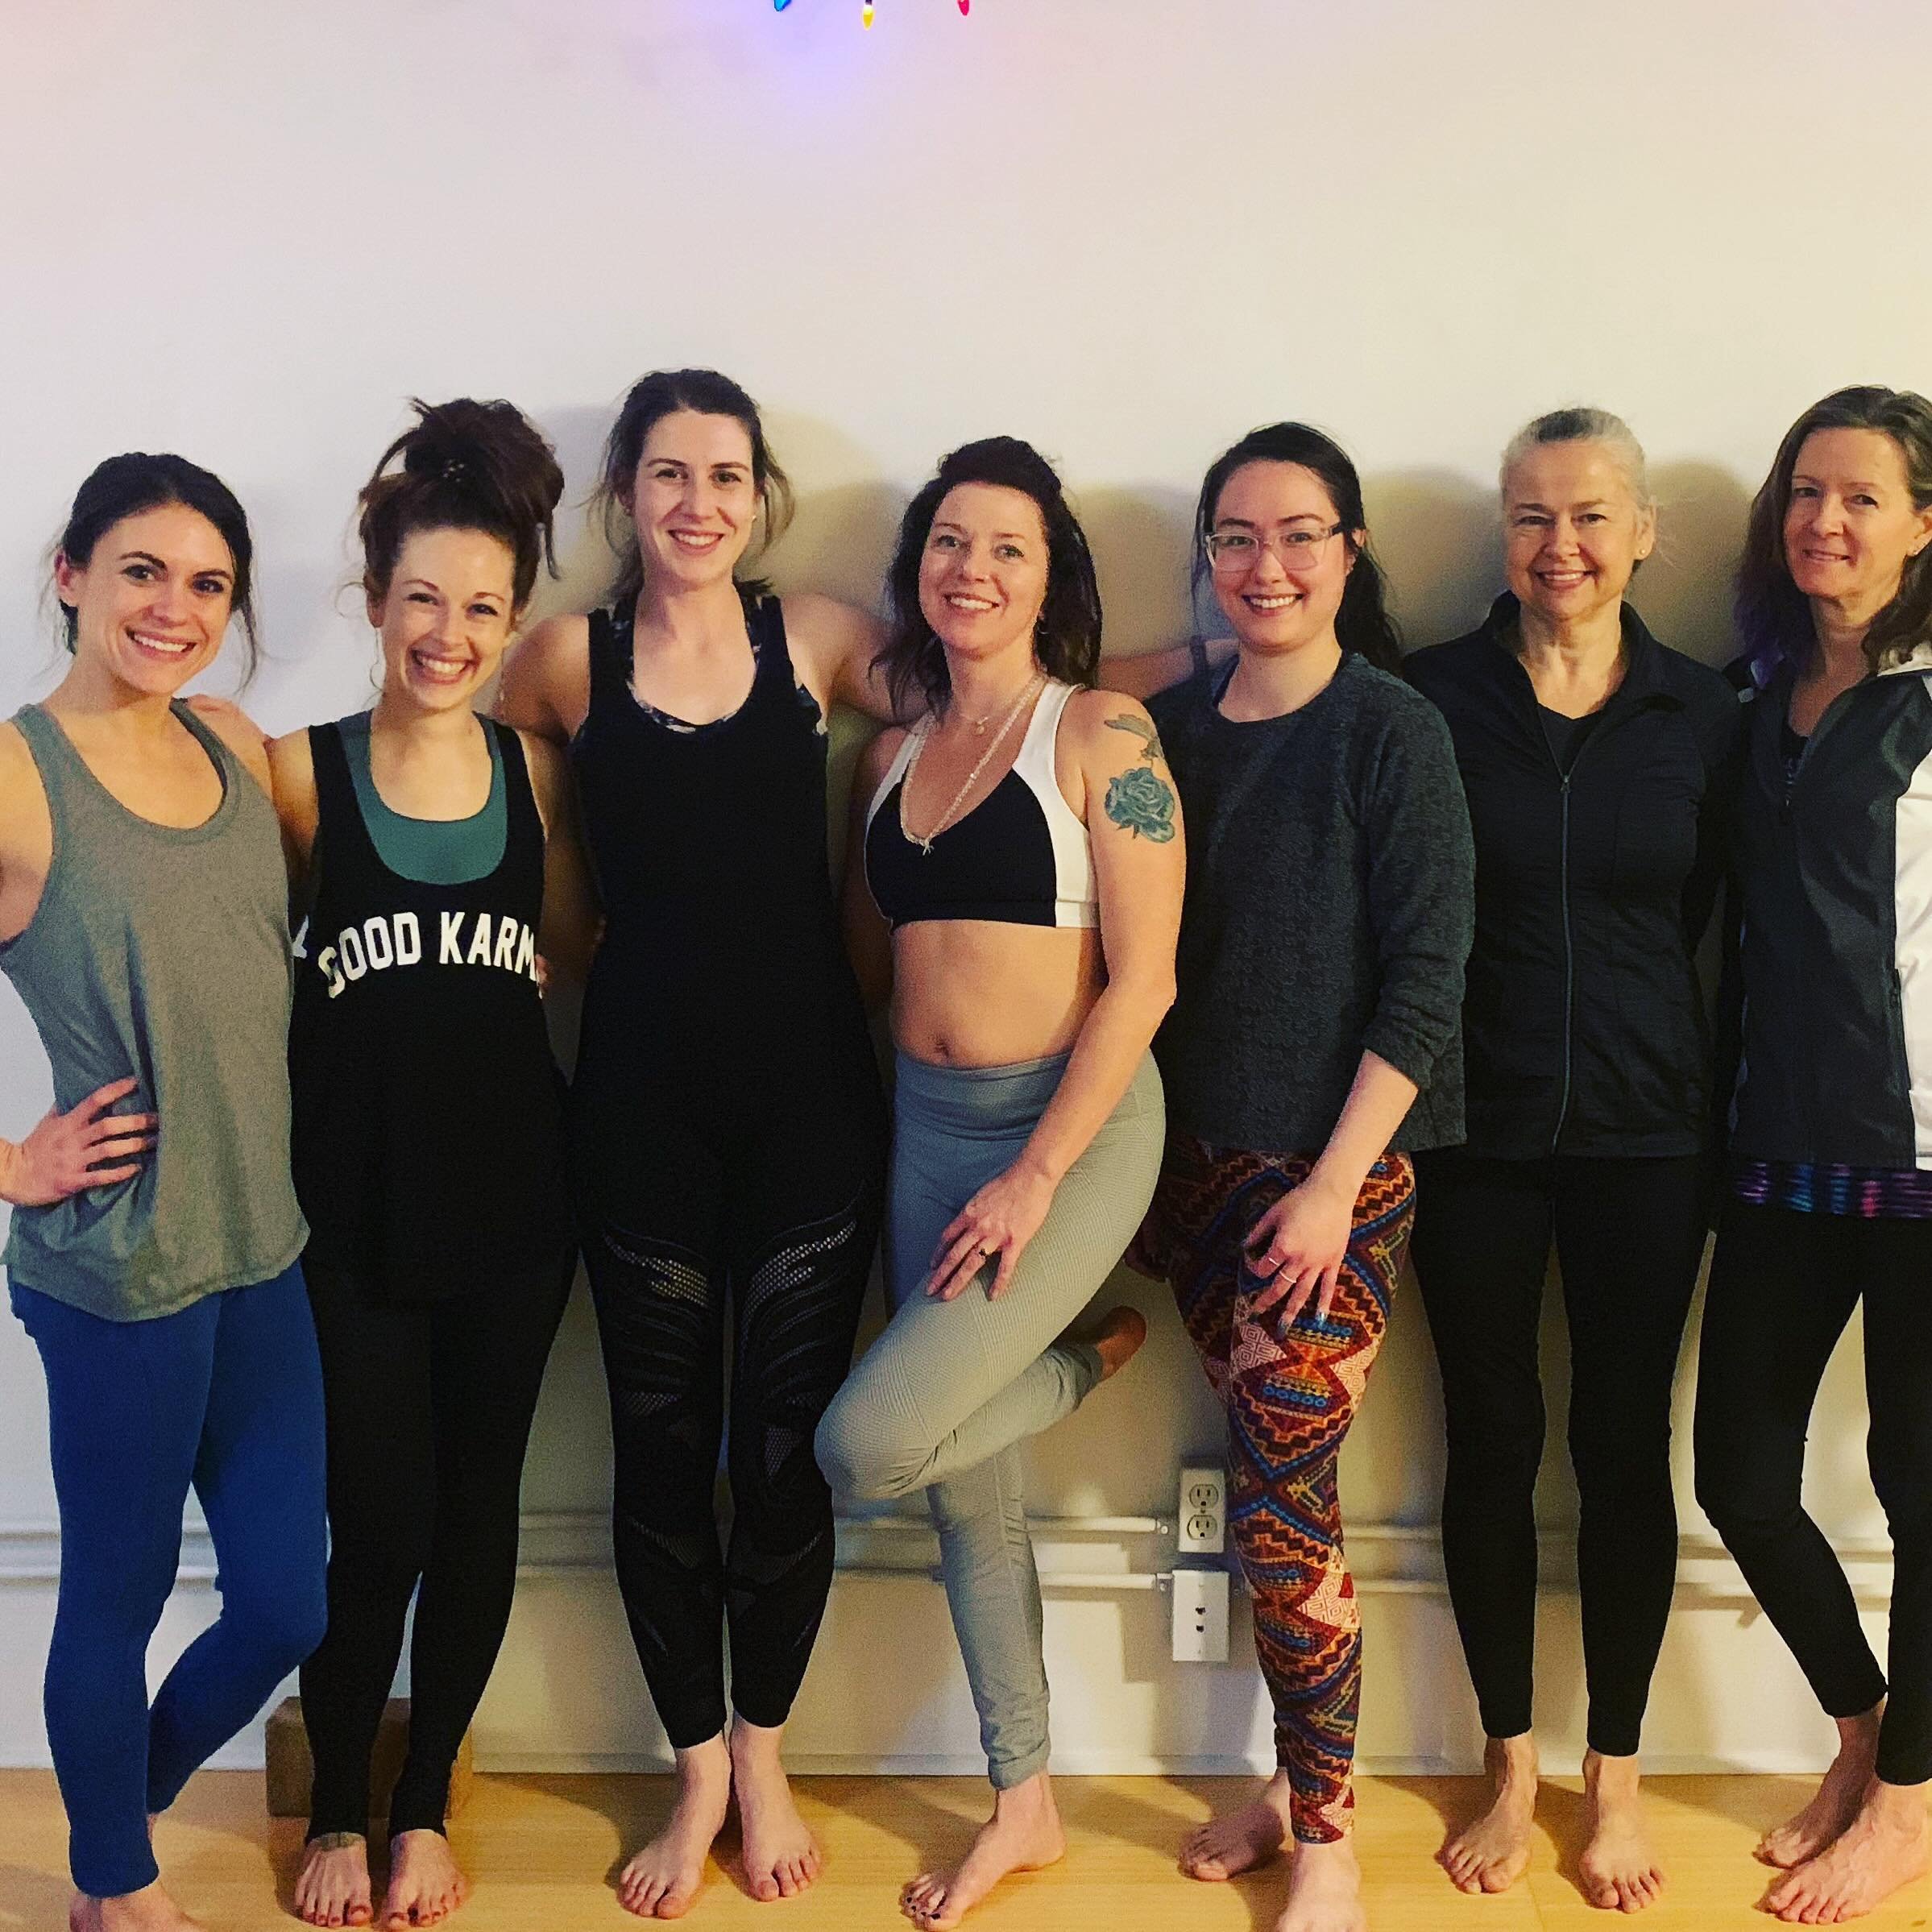 Learn the Larry Schultz Method of Rocket Yoga. We are a Rocket Yoga School that is run by Amber Jean-Marie a long time student of Larry Schultz. We uphold the highest standards for our trainings and graduates. We are an extension of Yoga ah Studio in